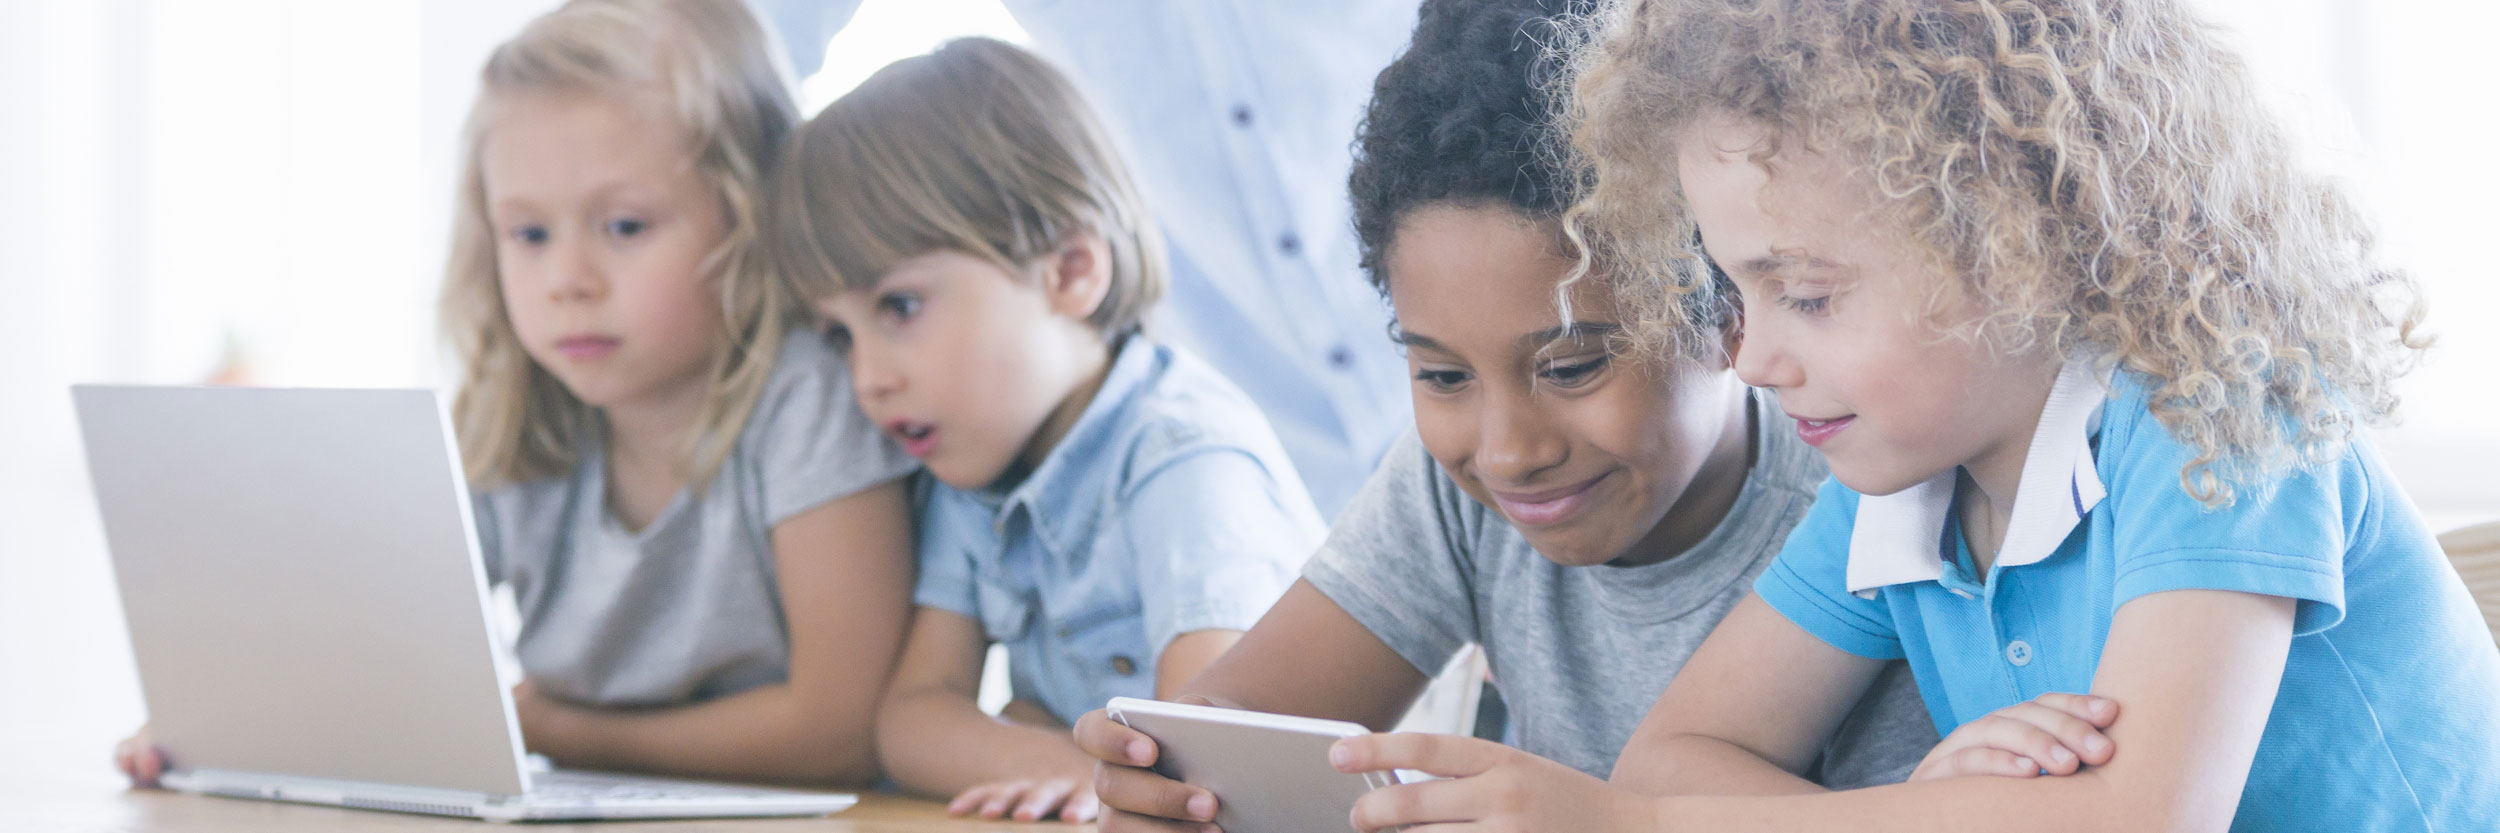 Fathom will Change the Way Children Read, Learn, and Collaborate